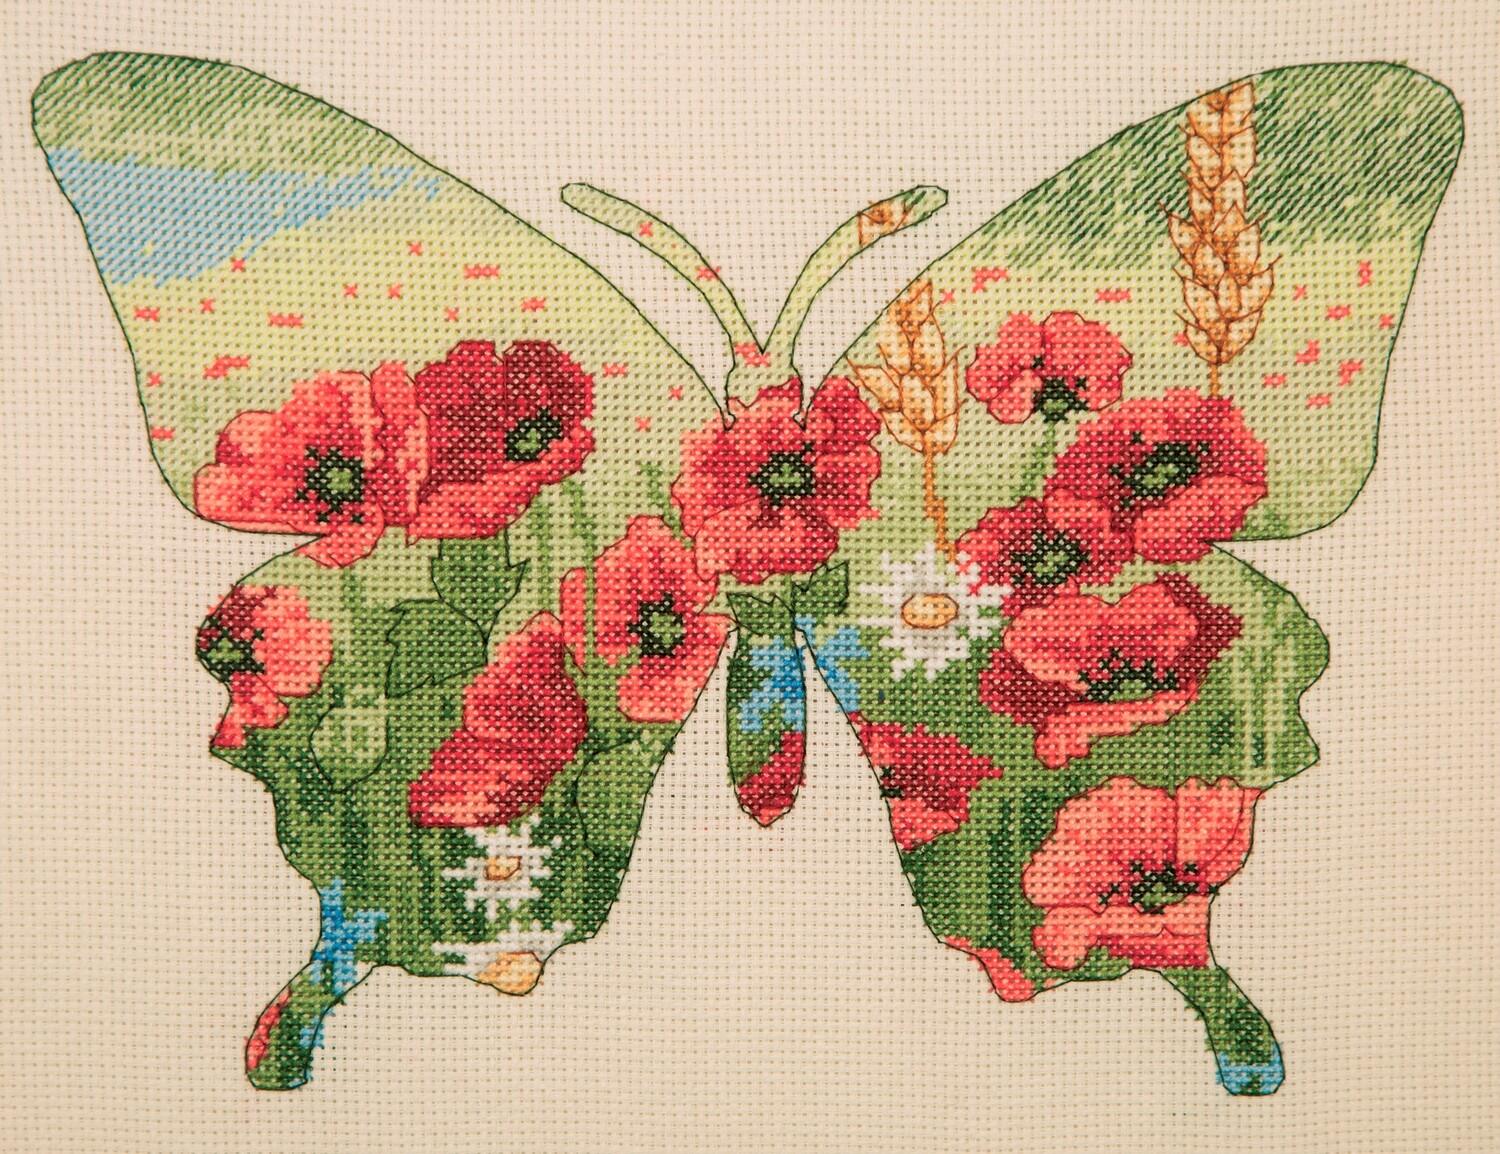 Counted Cross Stitch Kit Maia - Butterfly Silhouette, 05044 - Luca-S Cross Stitch Kits